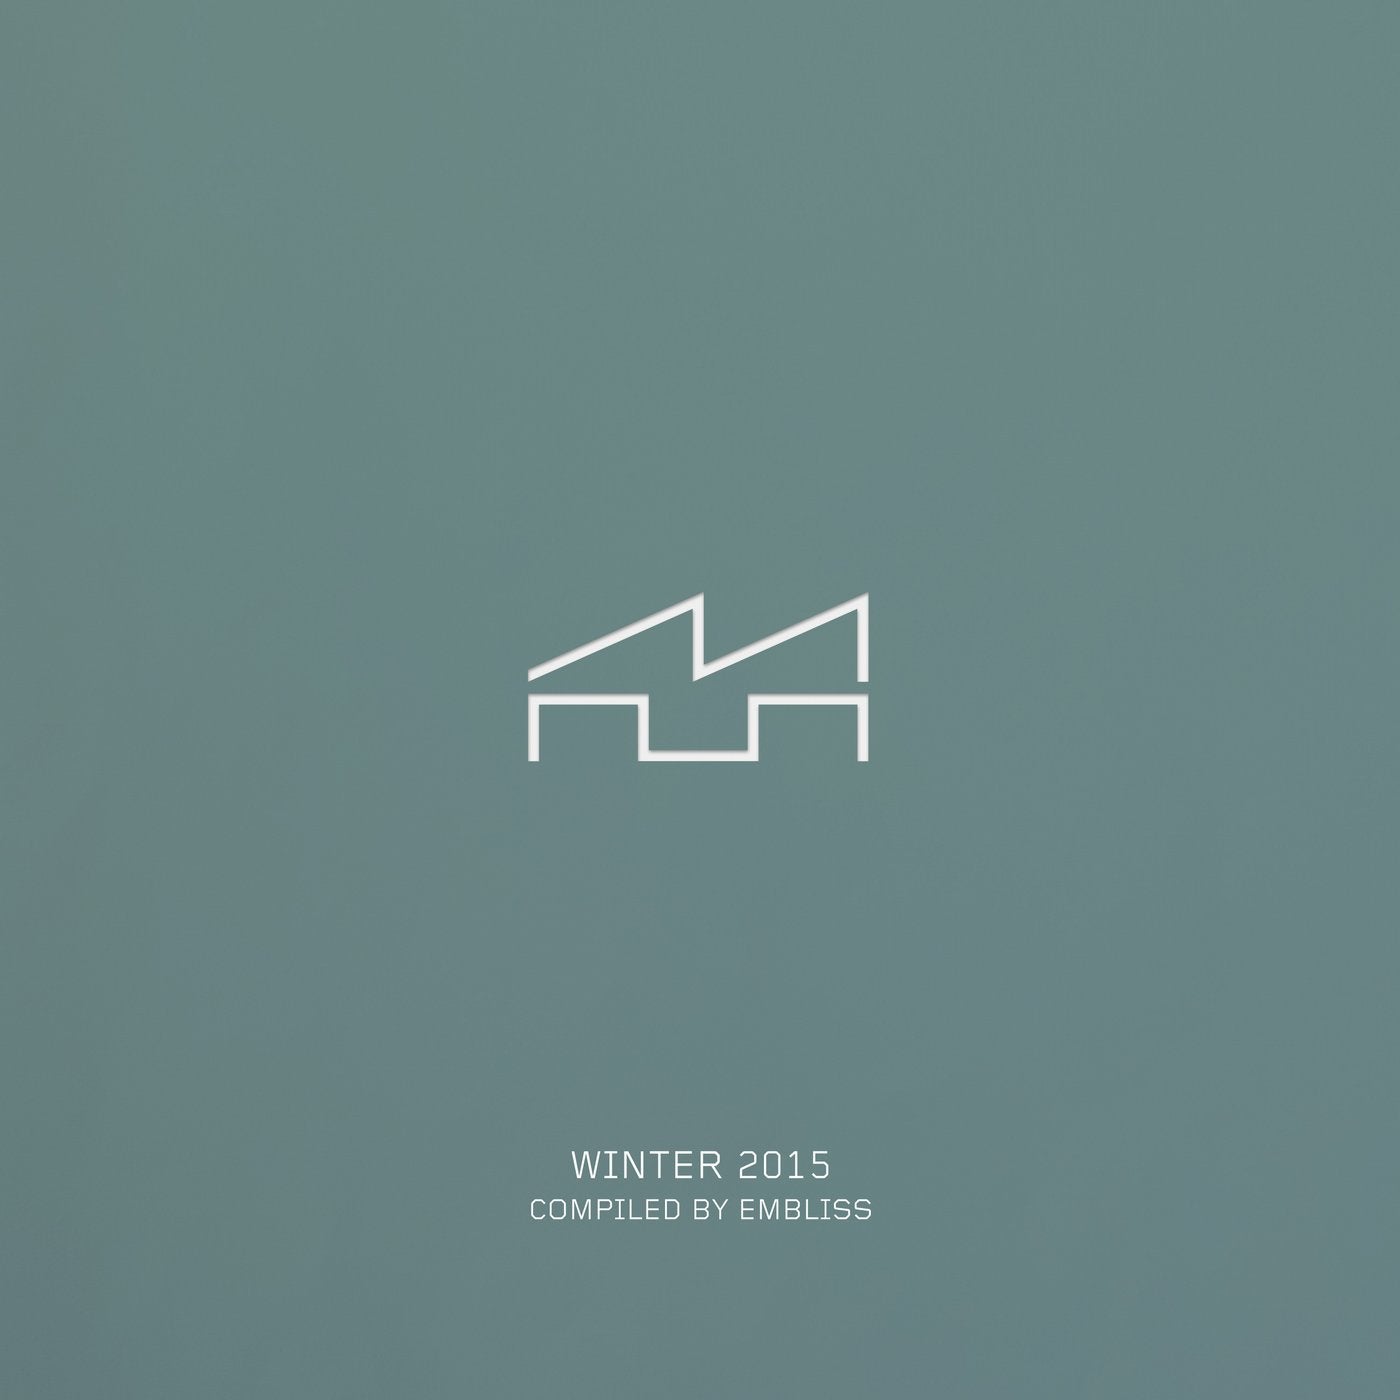 Mind Over Matter - Winter 2015 (Compiled by Embliss)